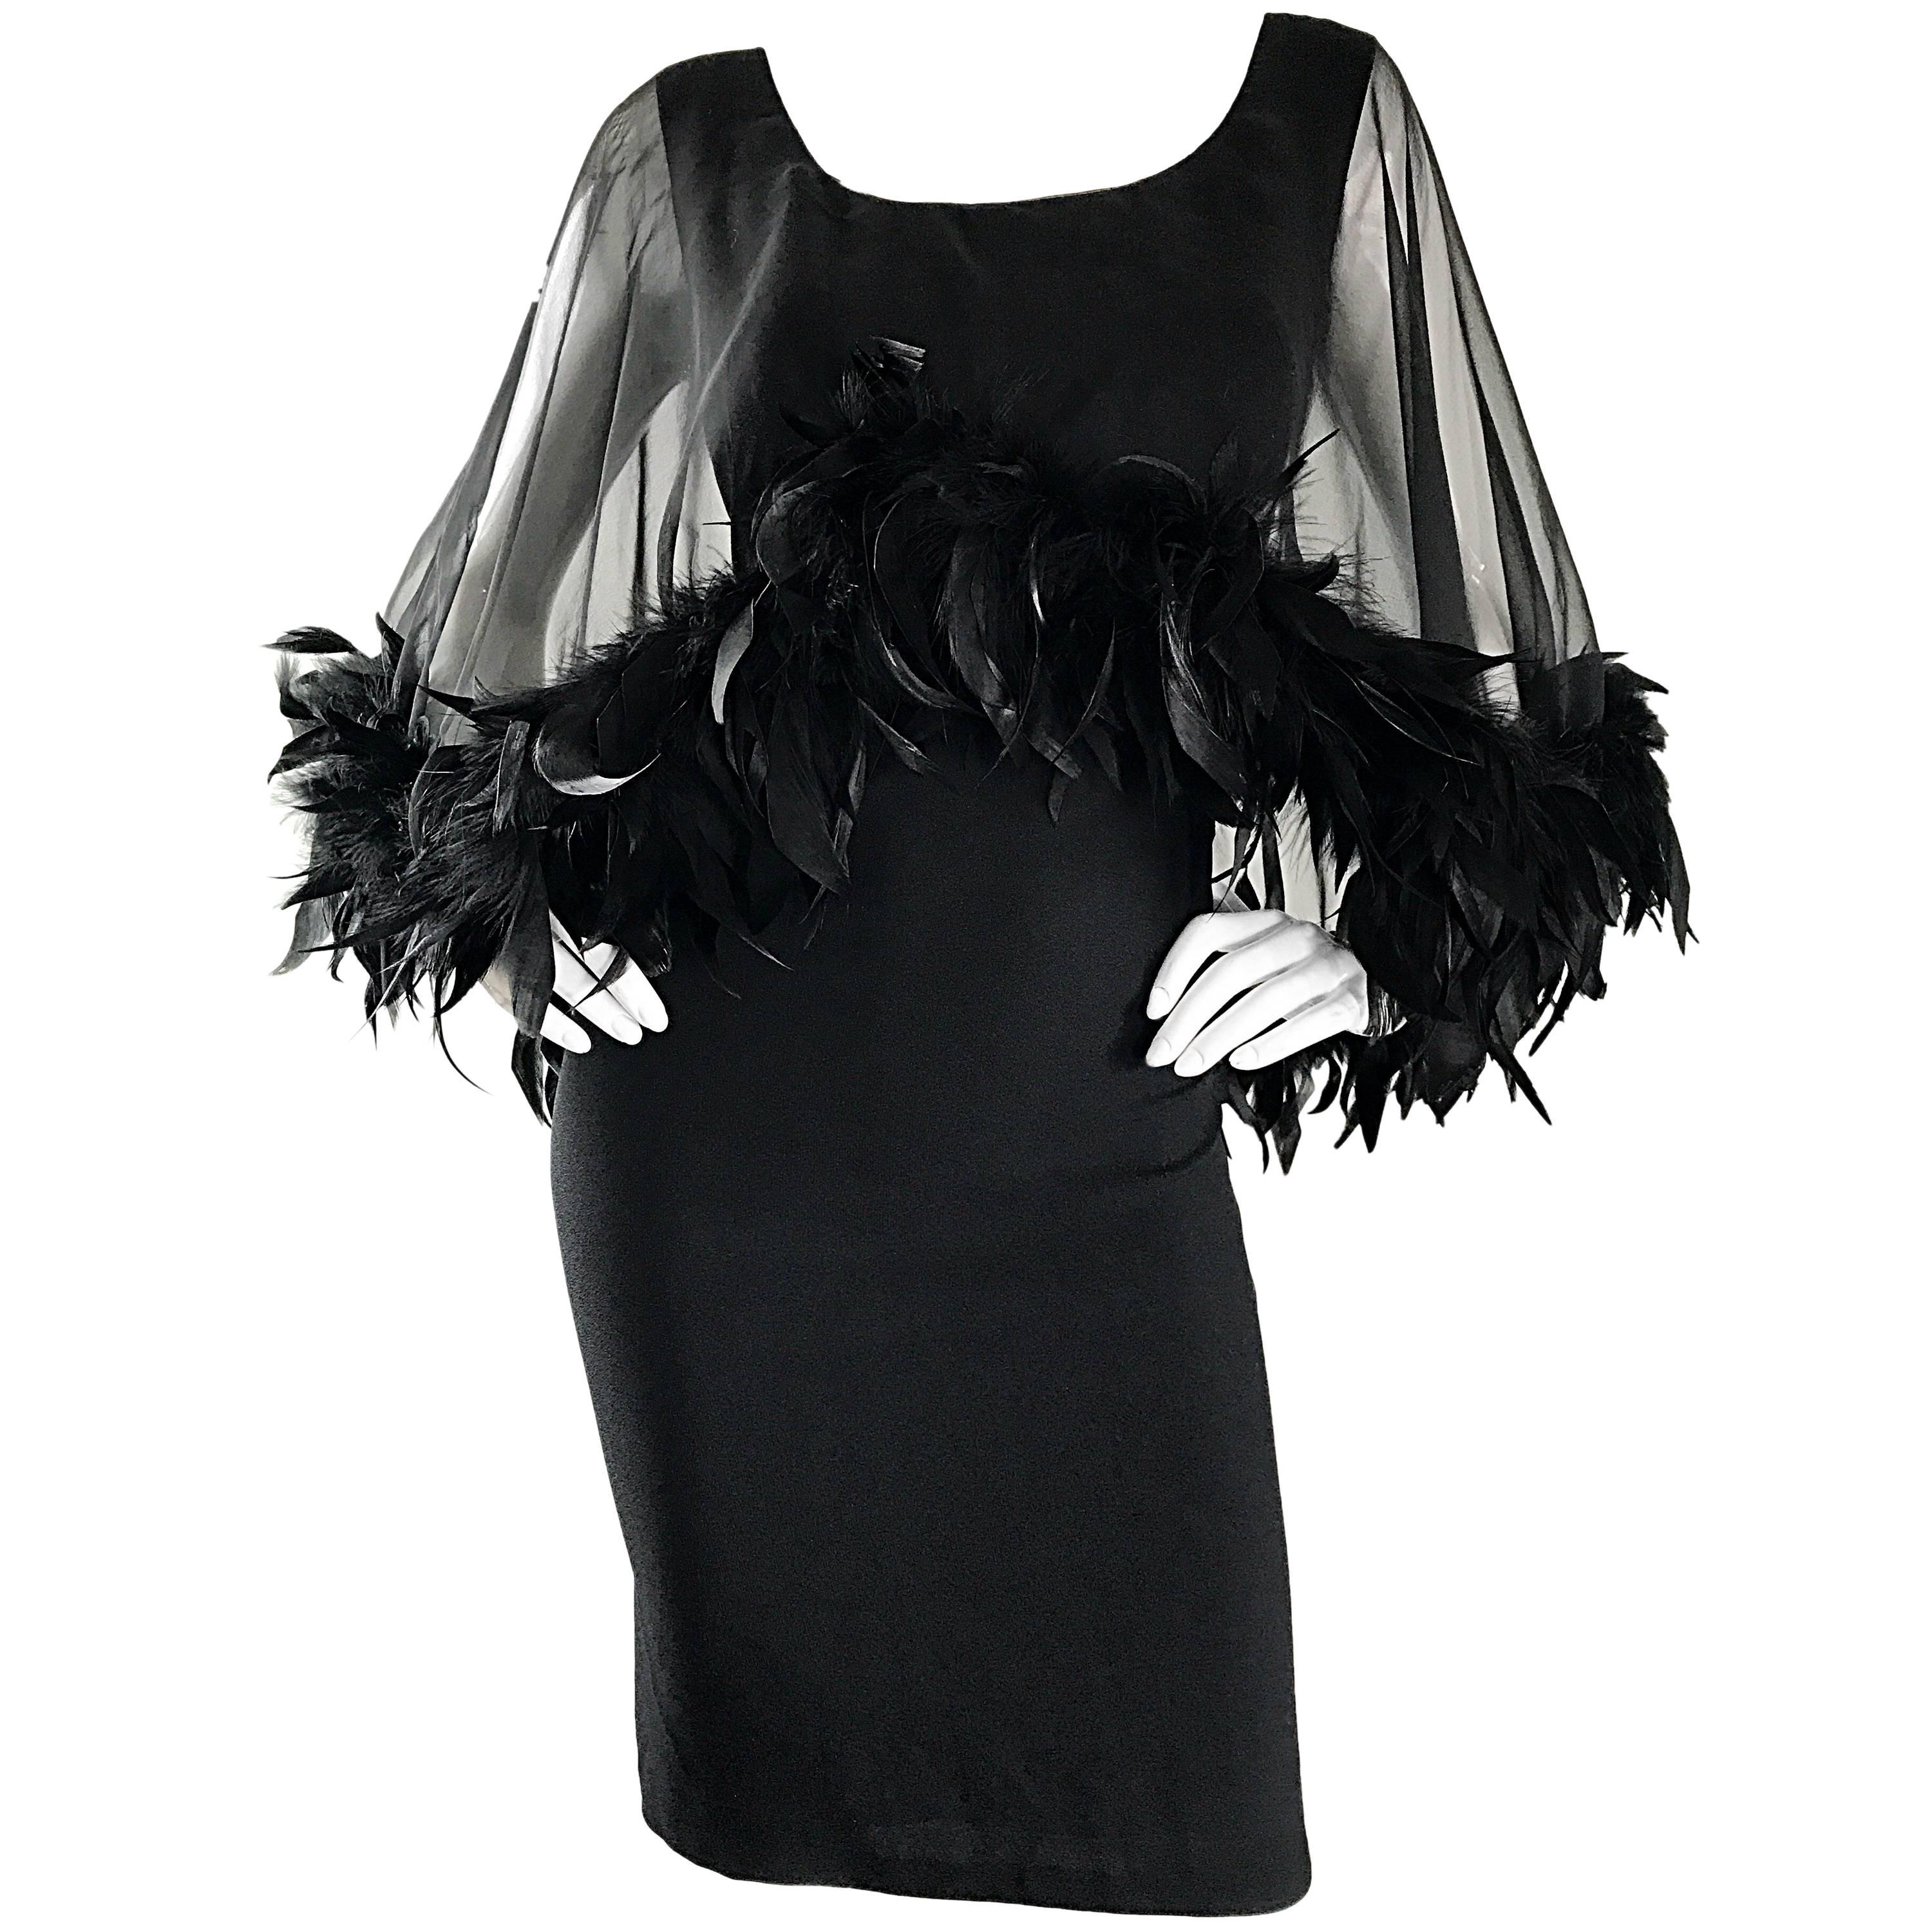 Gorgeous 1950s Demi Couture Black Vintage 50s Dress w/ Sheer Feather Overlay